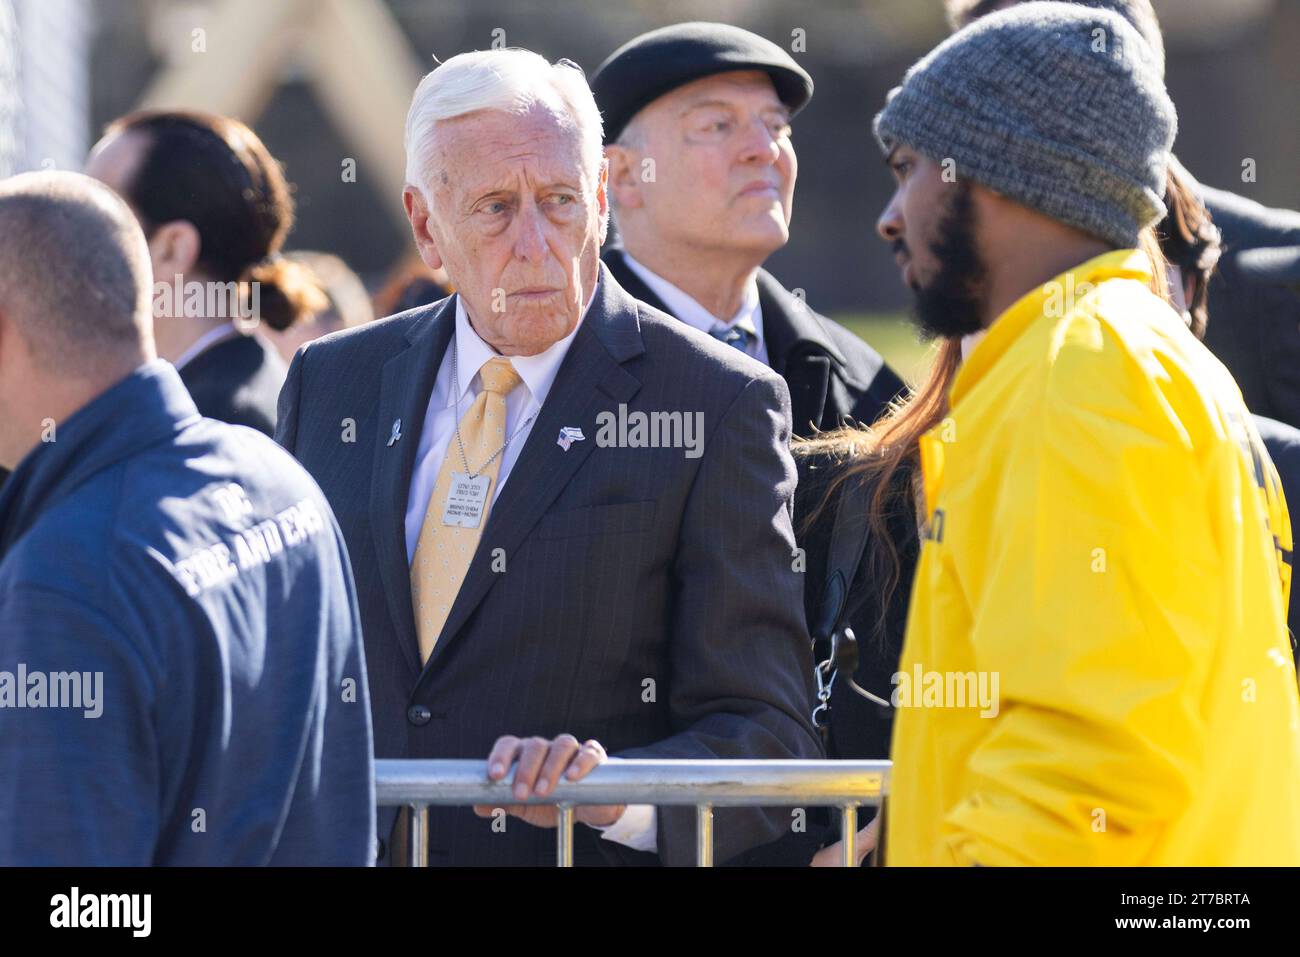 United States Representative Steny Hoyer Democrat of Maryland is seen at an event in support of the state of Israel and against antisemitism on Tuesday, November 14, 2023. Copyright: xCNPx/xMediaPunchx Credit: Imago/Alamy Live News Stock Photo